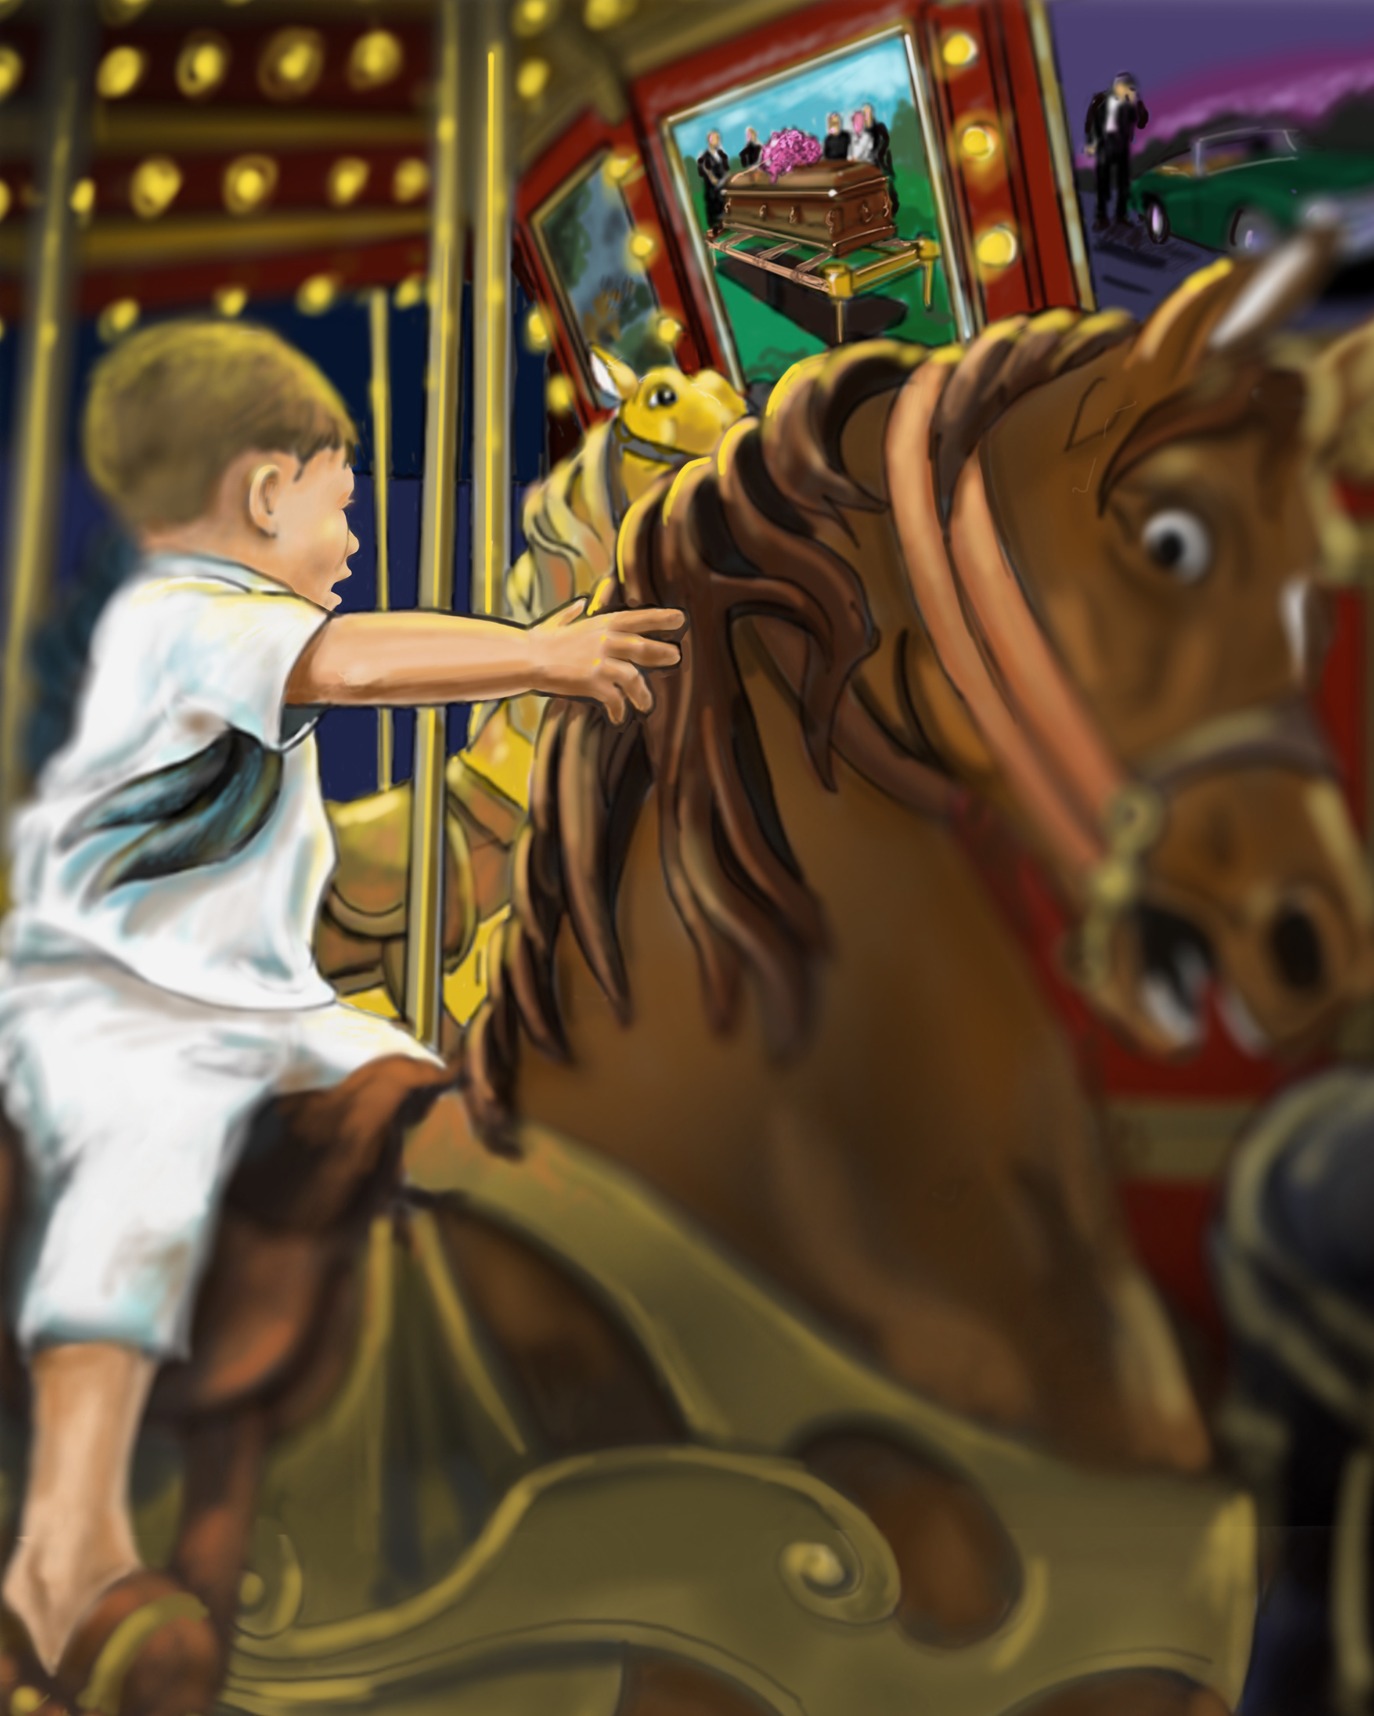 Carousel Dream Illustration from The Speed Of Life by James Victor Jordan